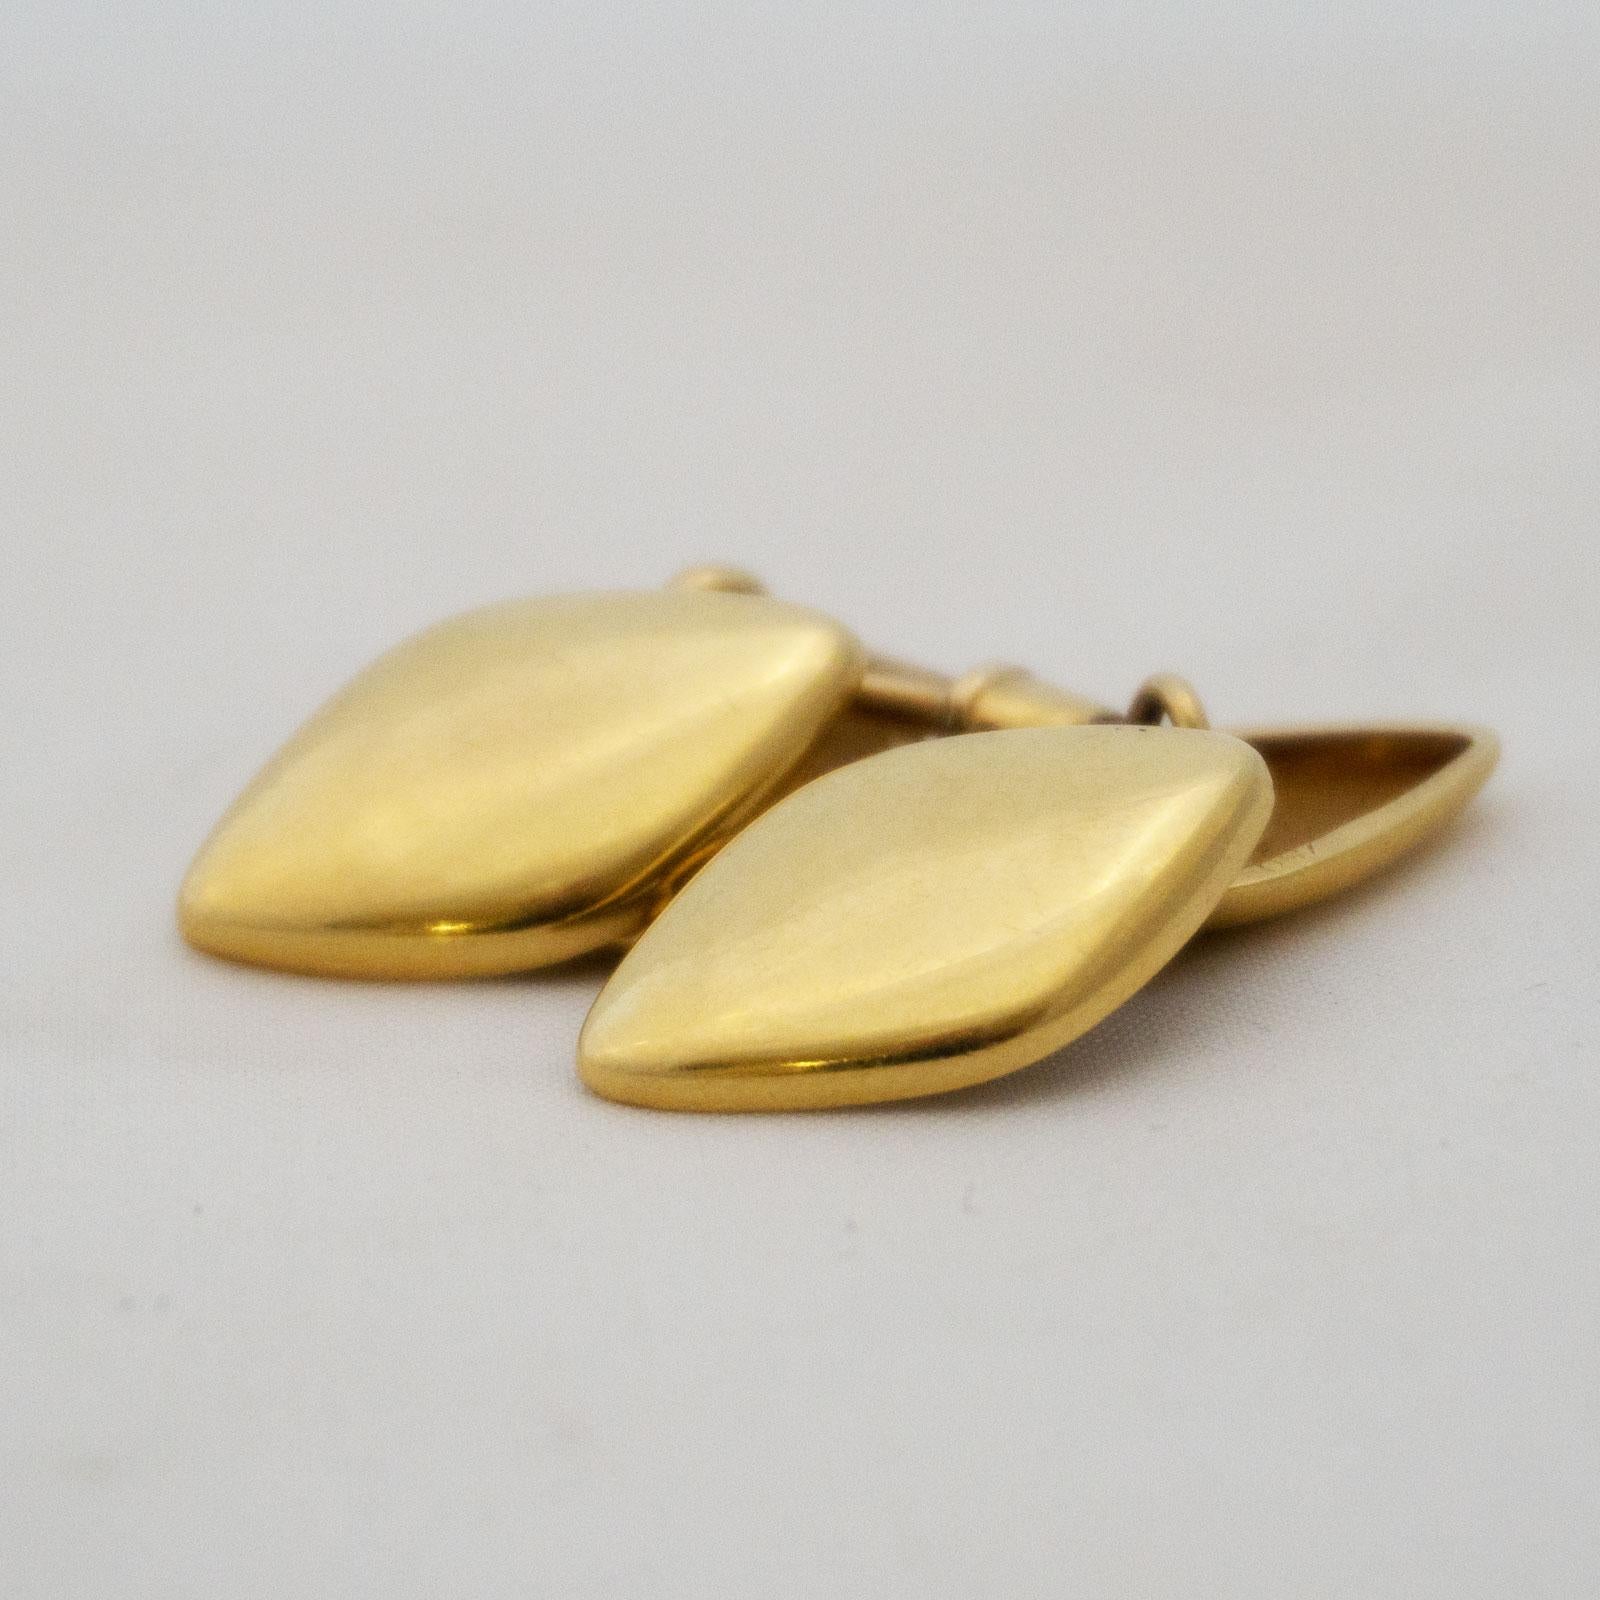 Golden cufflinks in rhomb shape
Simple elegance meets the noblest material. This discreet men's accessory adorns the well-groomed gentleman both in the office and at the big gala. Two polished rhombuses connected by a snap hook enhance the wardrobe.